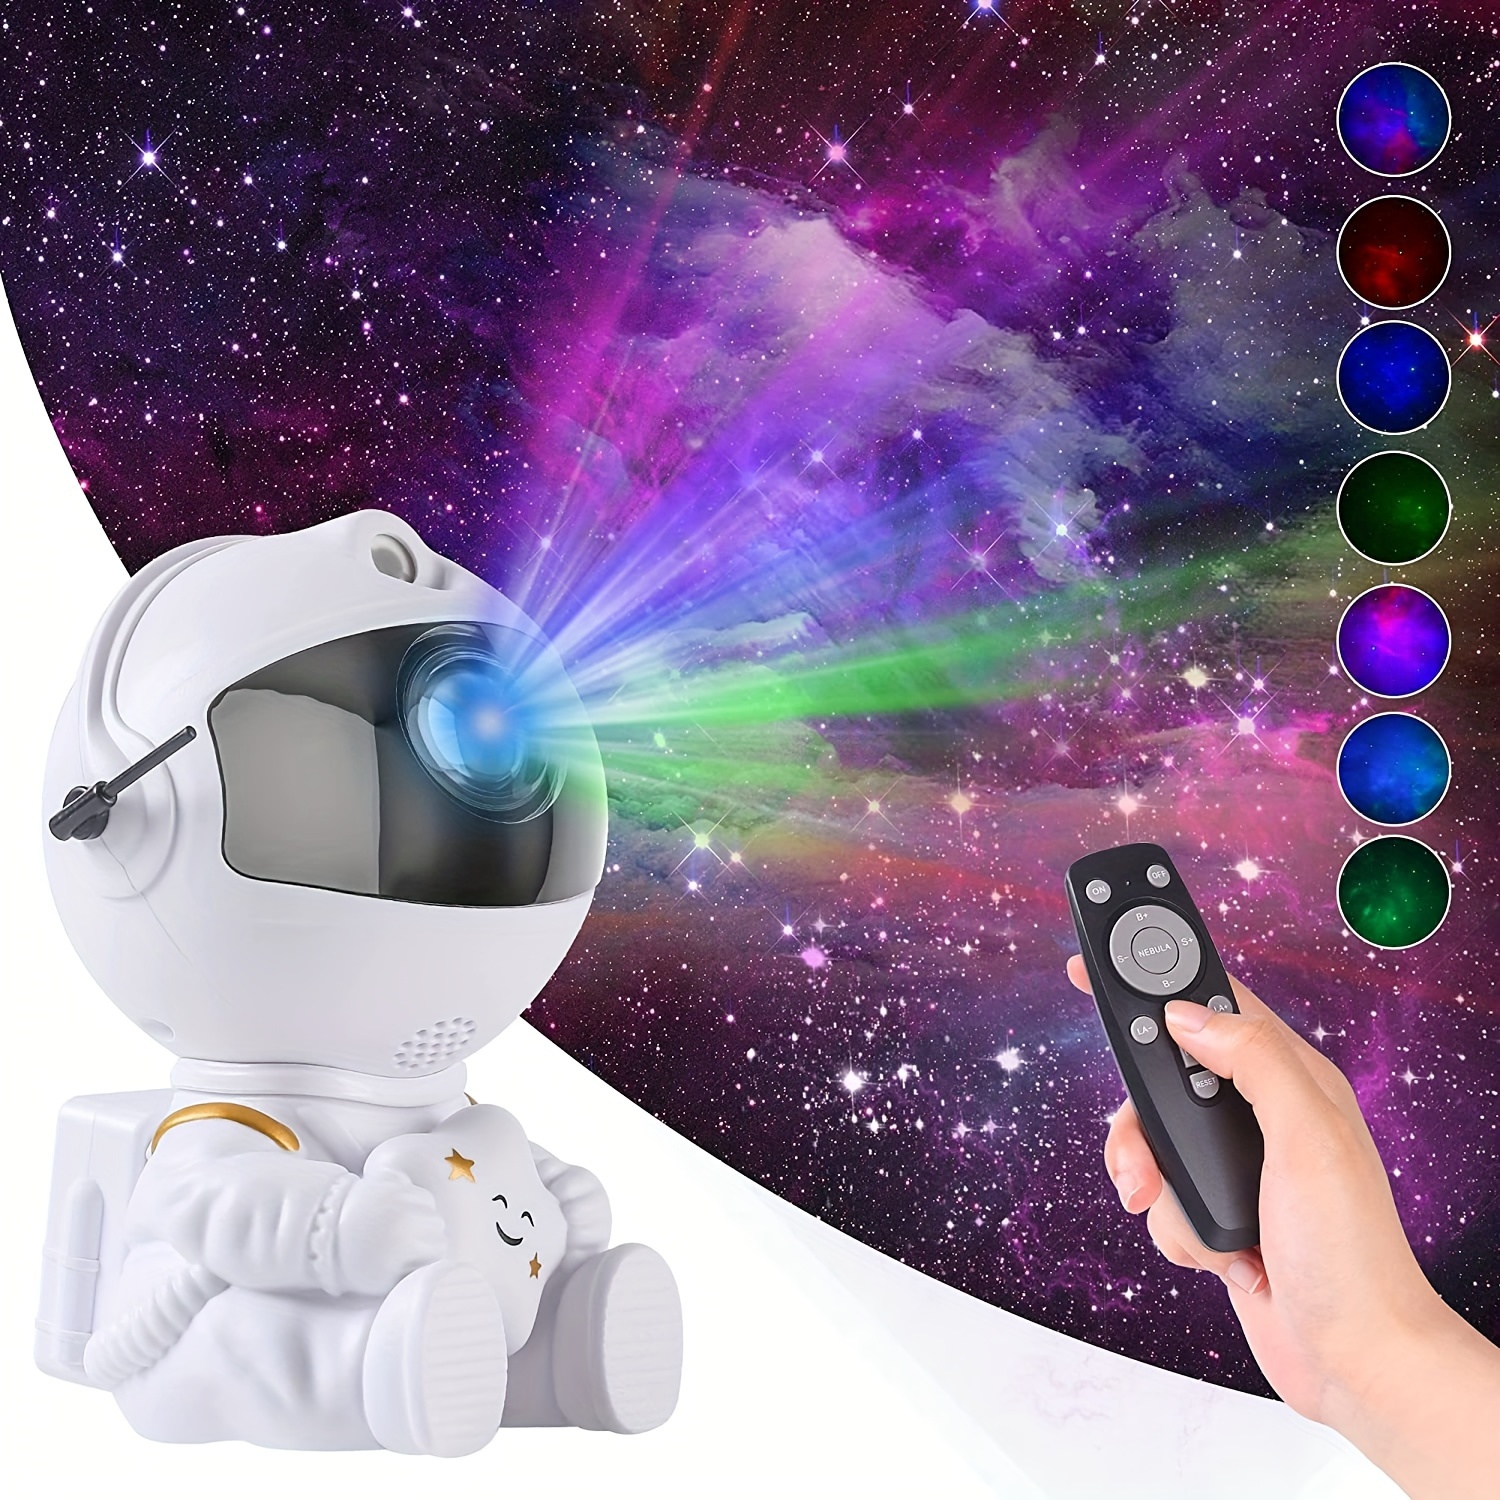  Space Buddy Projector, Astronaut Light Projector, Star Galaxy  Night Lights, Nebula Galaxy with Timer and Remote, Kids Gaming Room Bedroom  Decor, Christmas, Great Gift for Kids : Baby